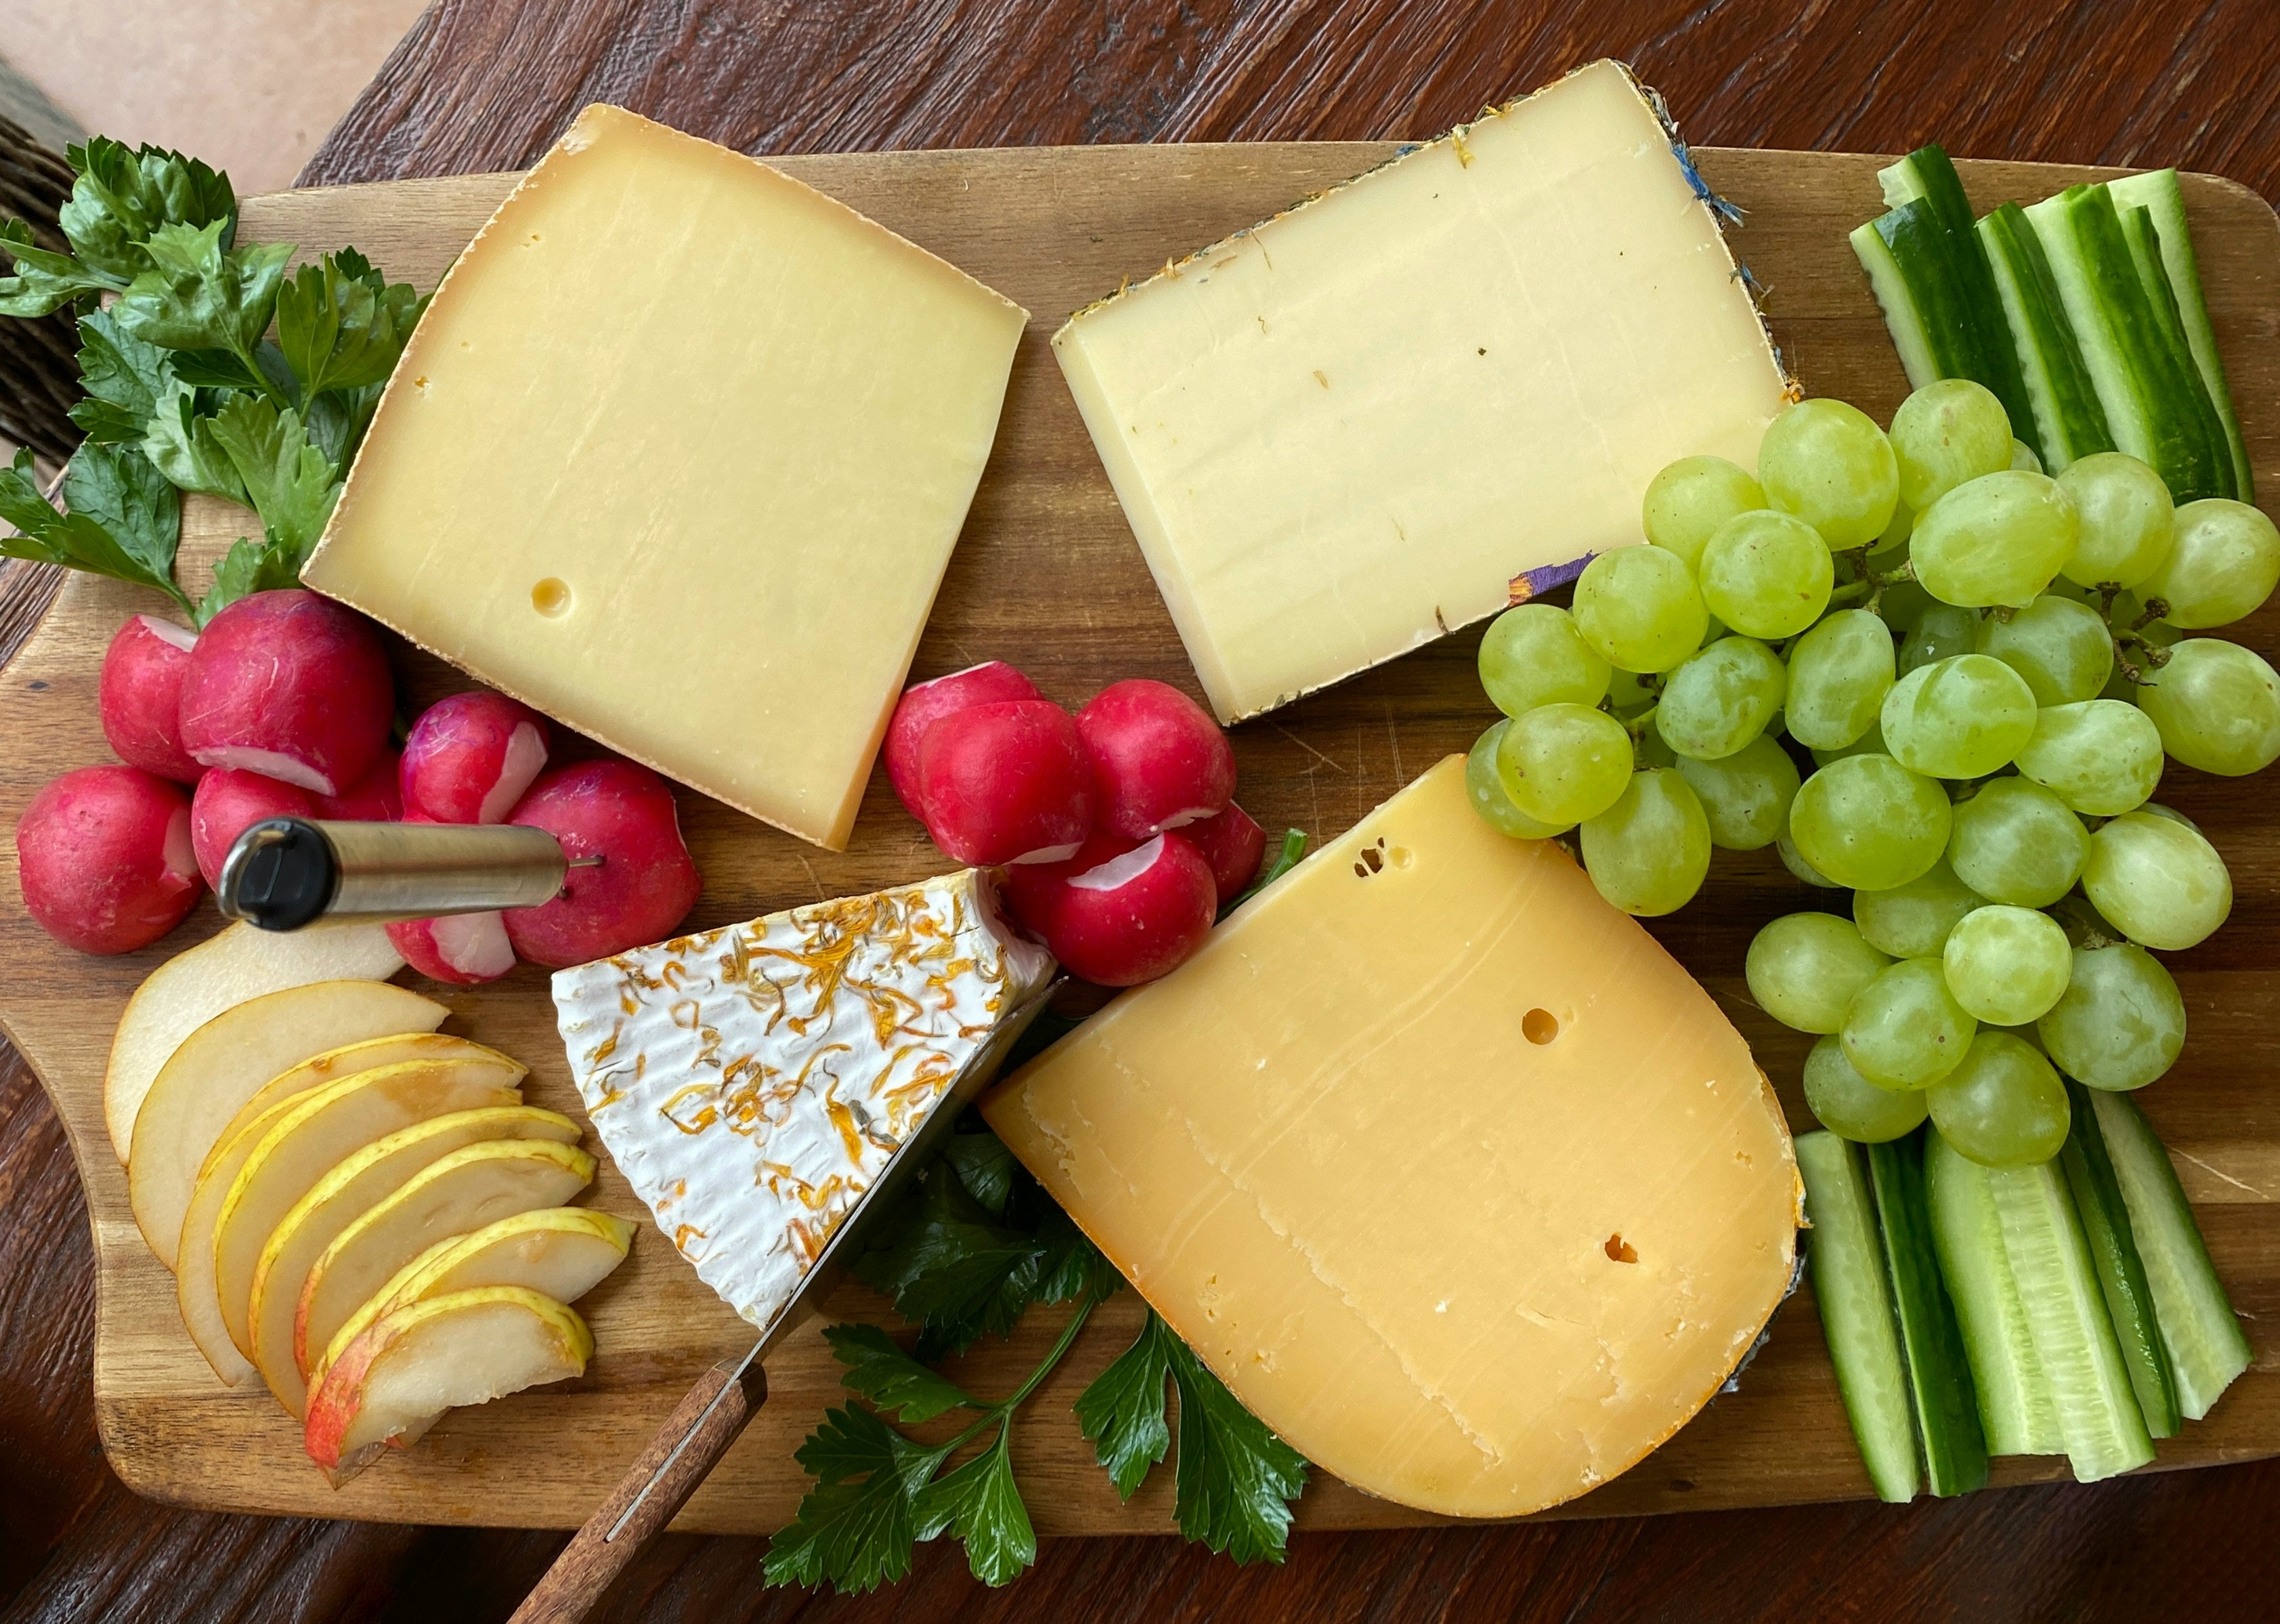 Top 5 Unexpected Cheeses You Need to Try for Snacking